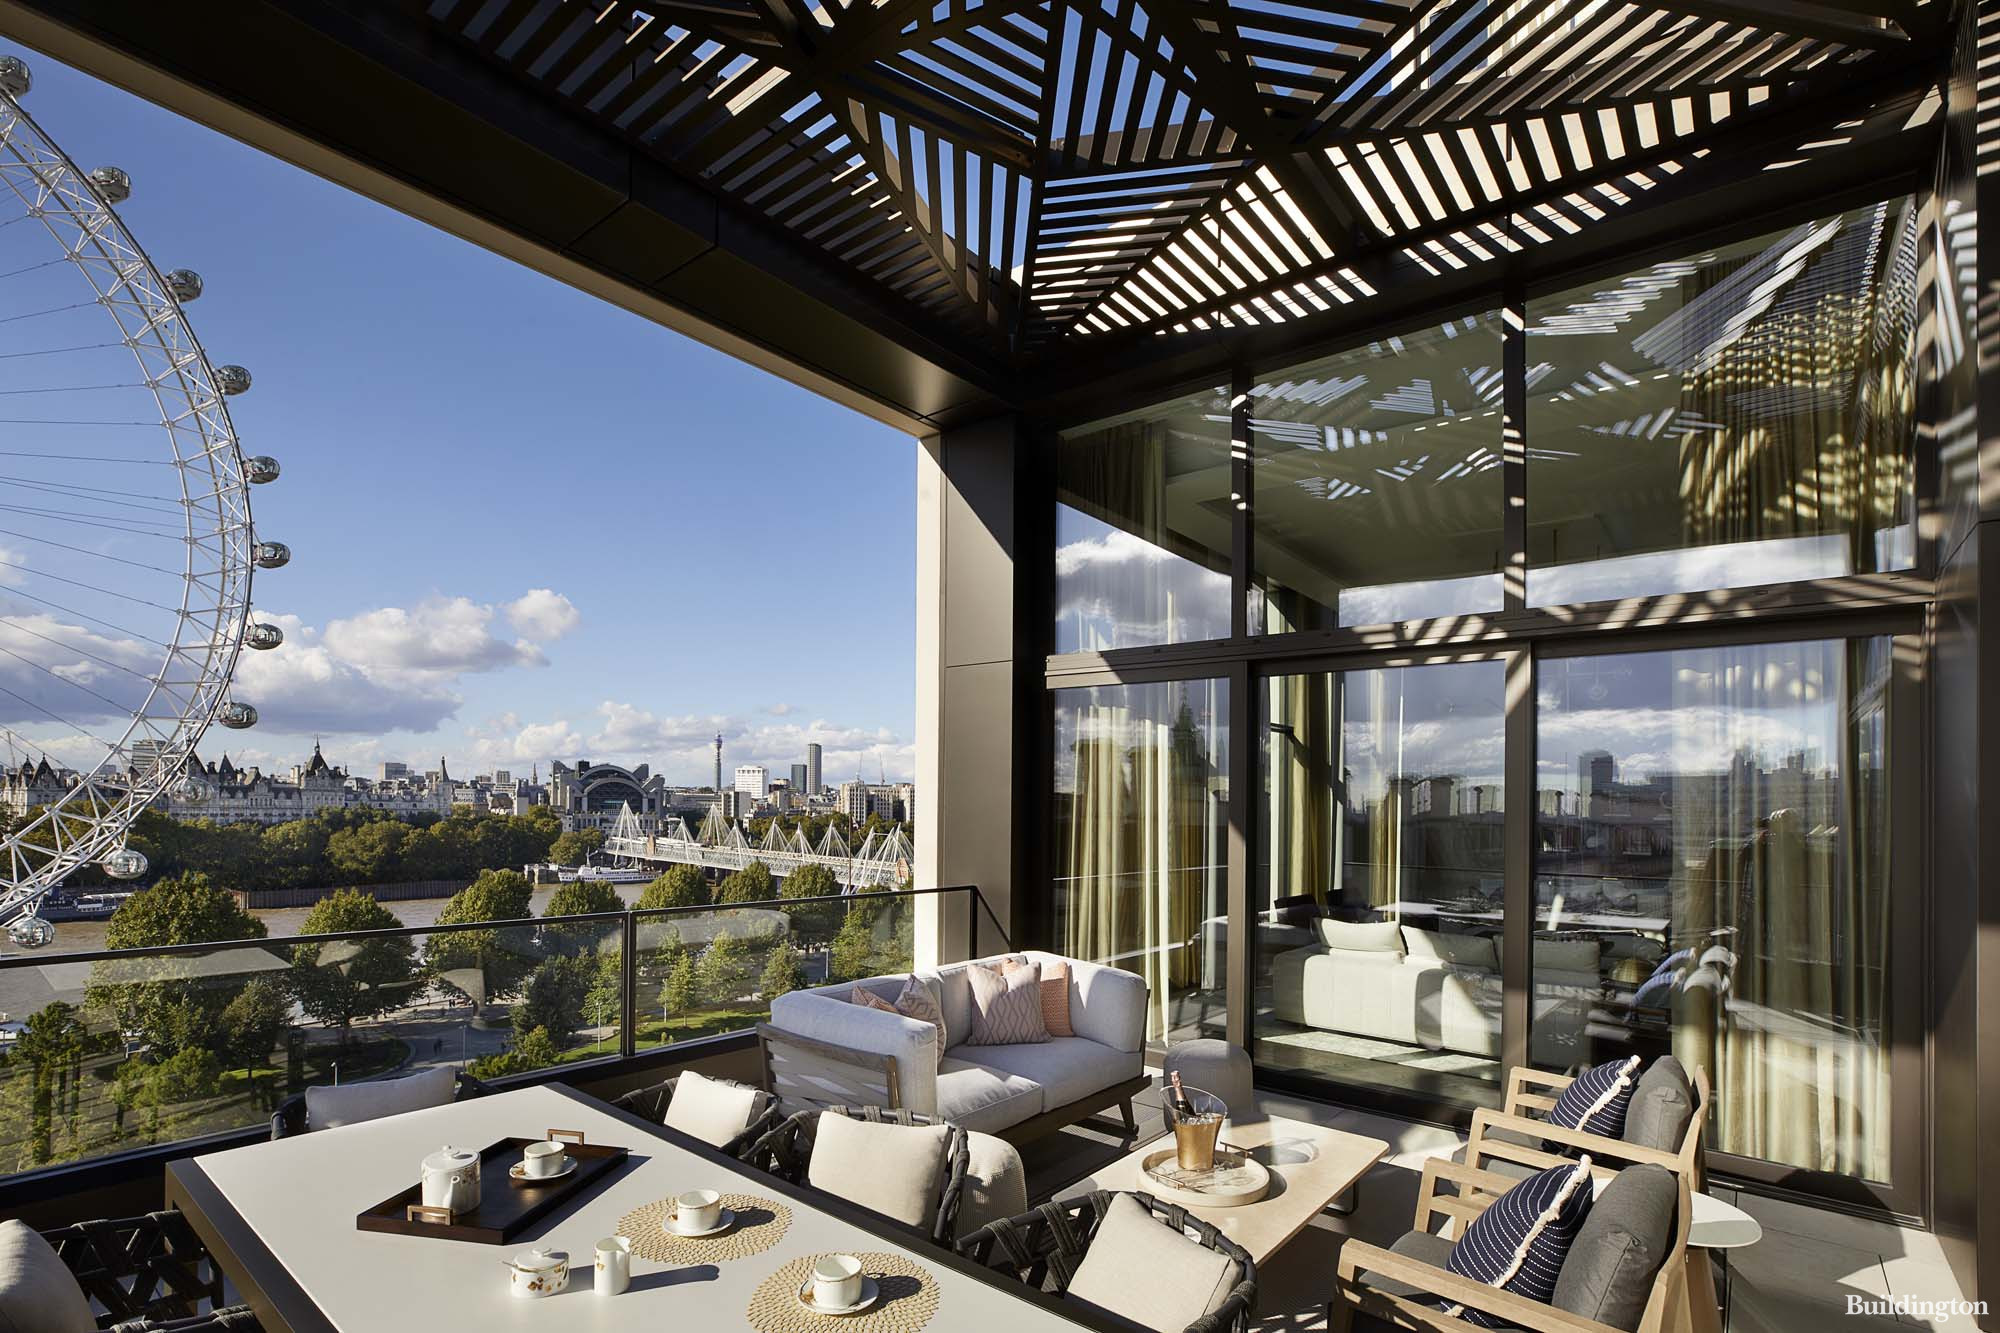 Penthouse at Belvedere Gardens in Southbank Place development in London SE1